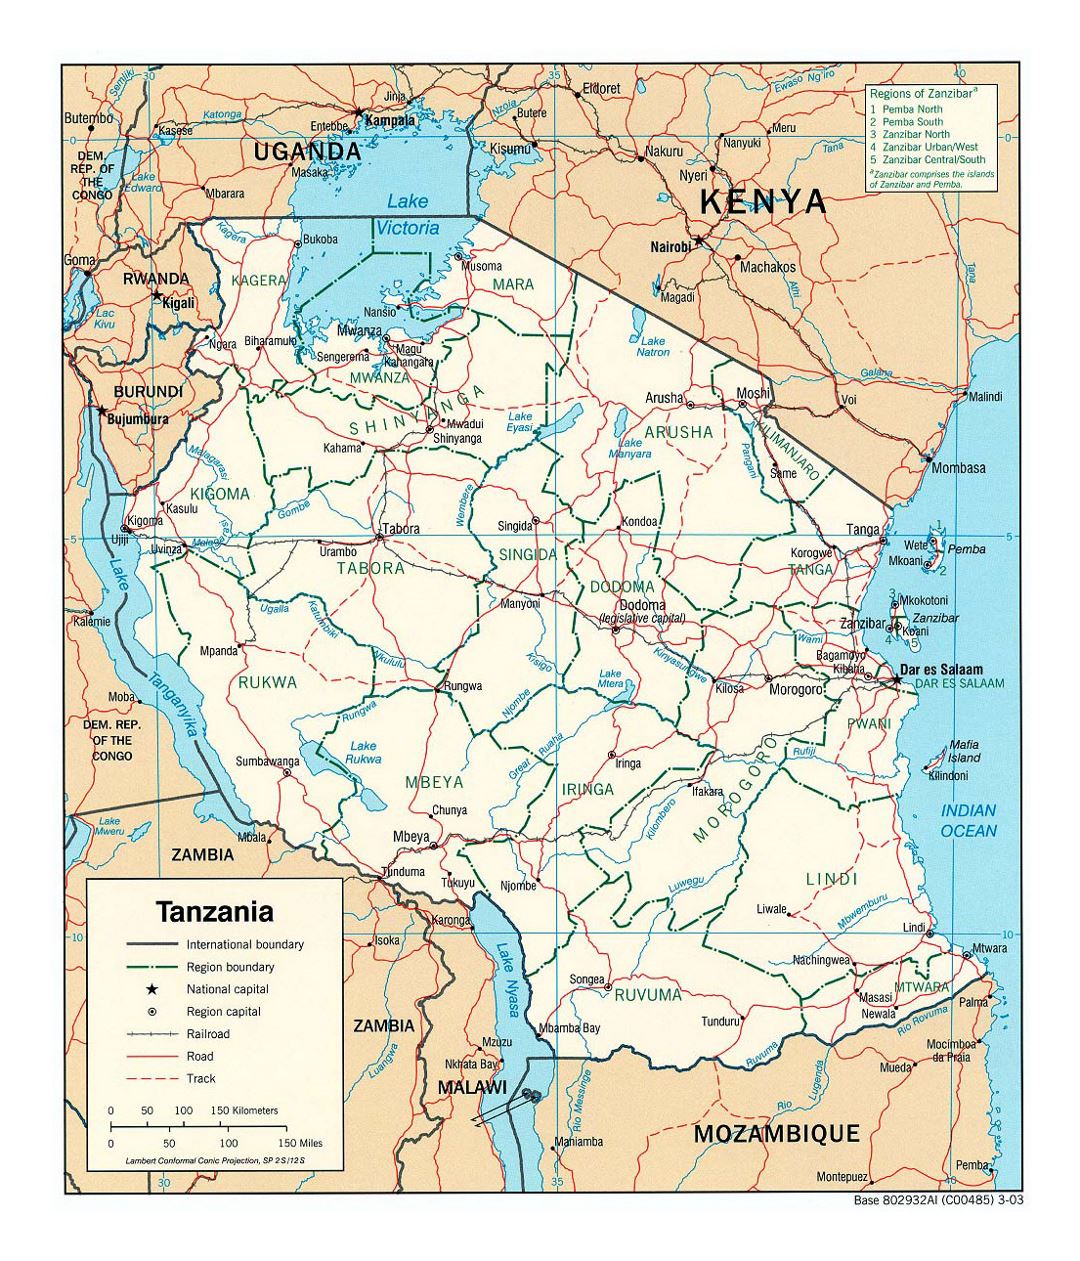 Detailed political and administrative map of Tanzania with roads, railroads and major cities - 2003